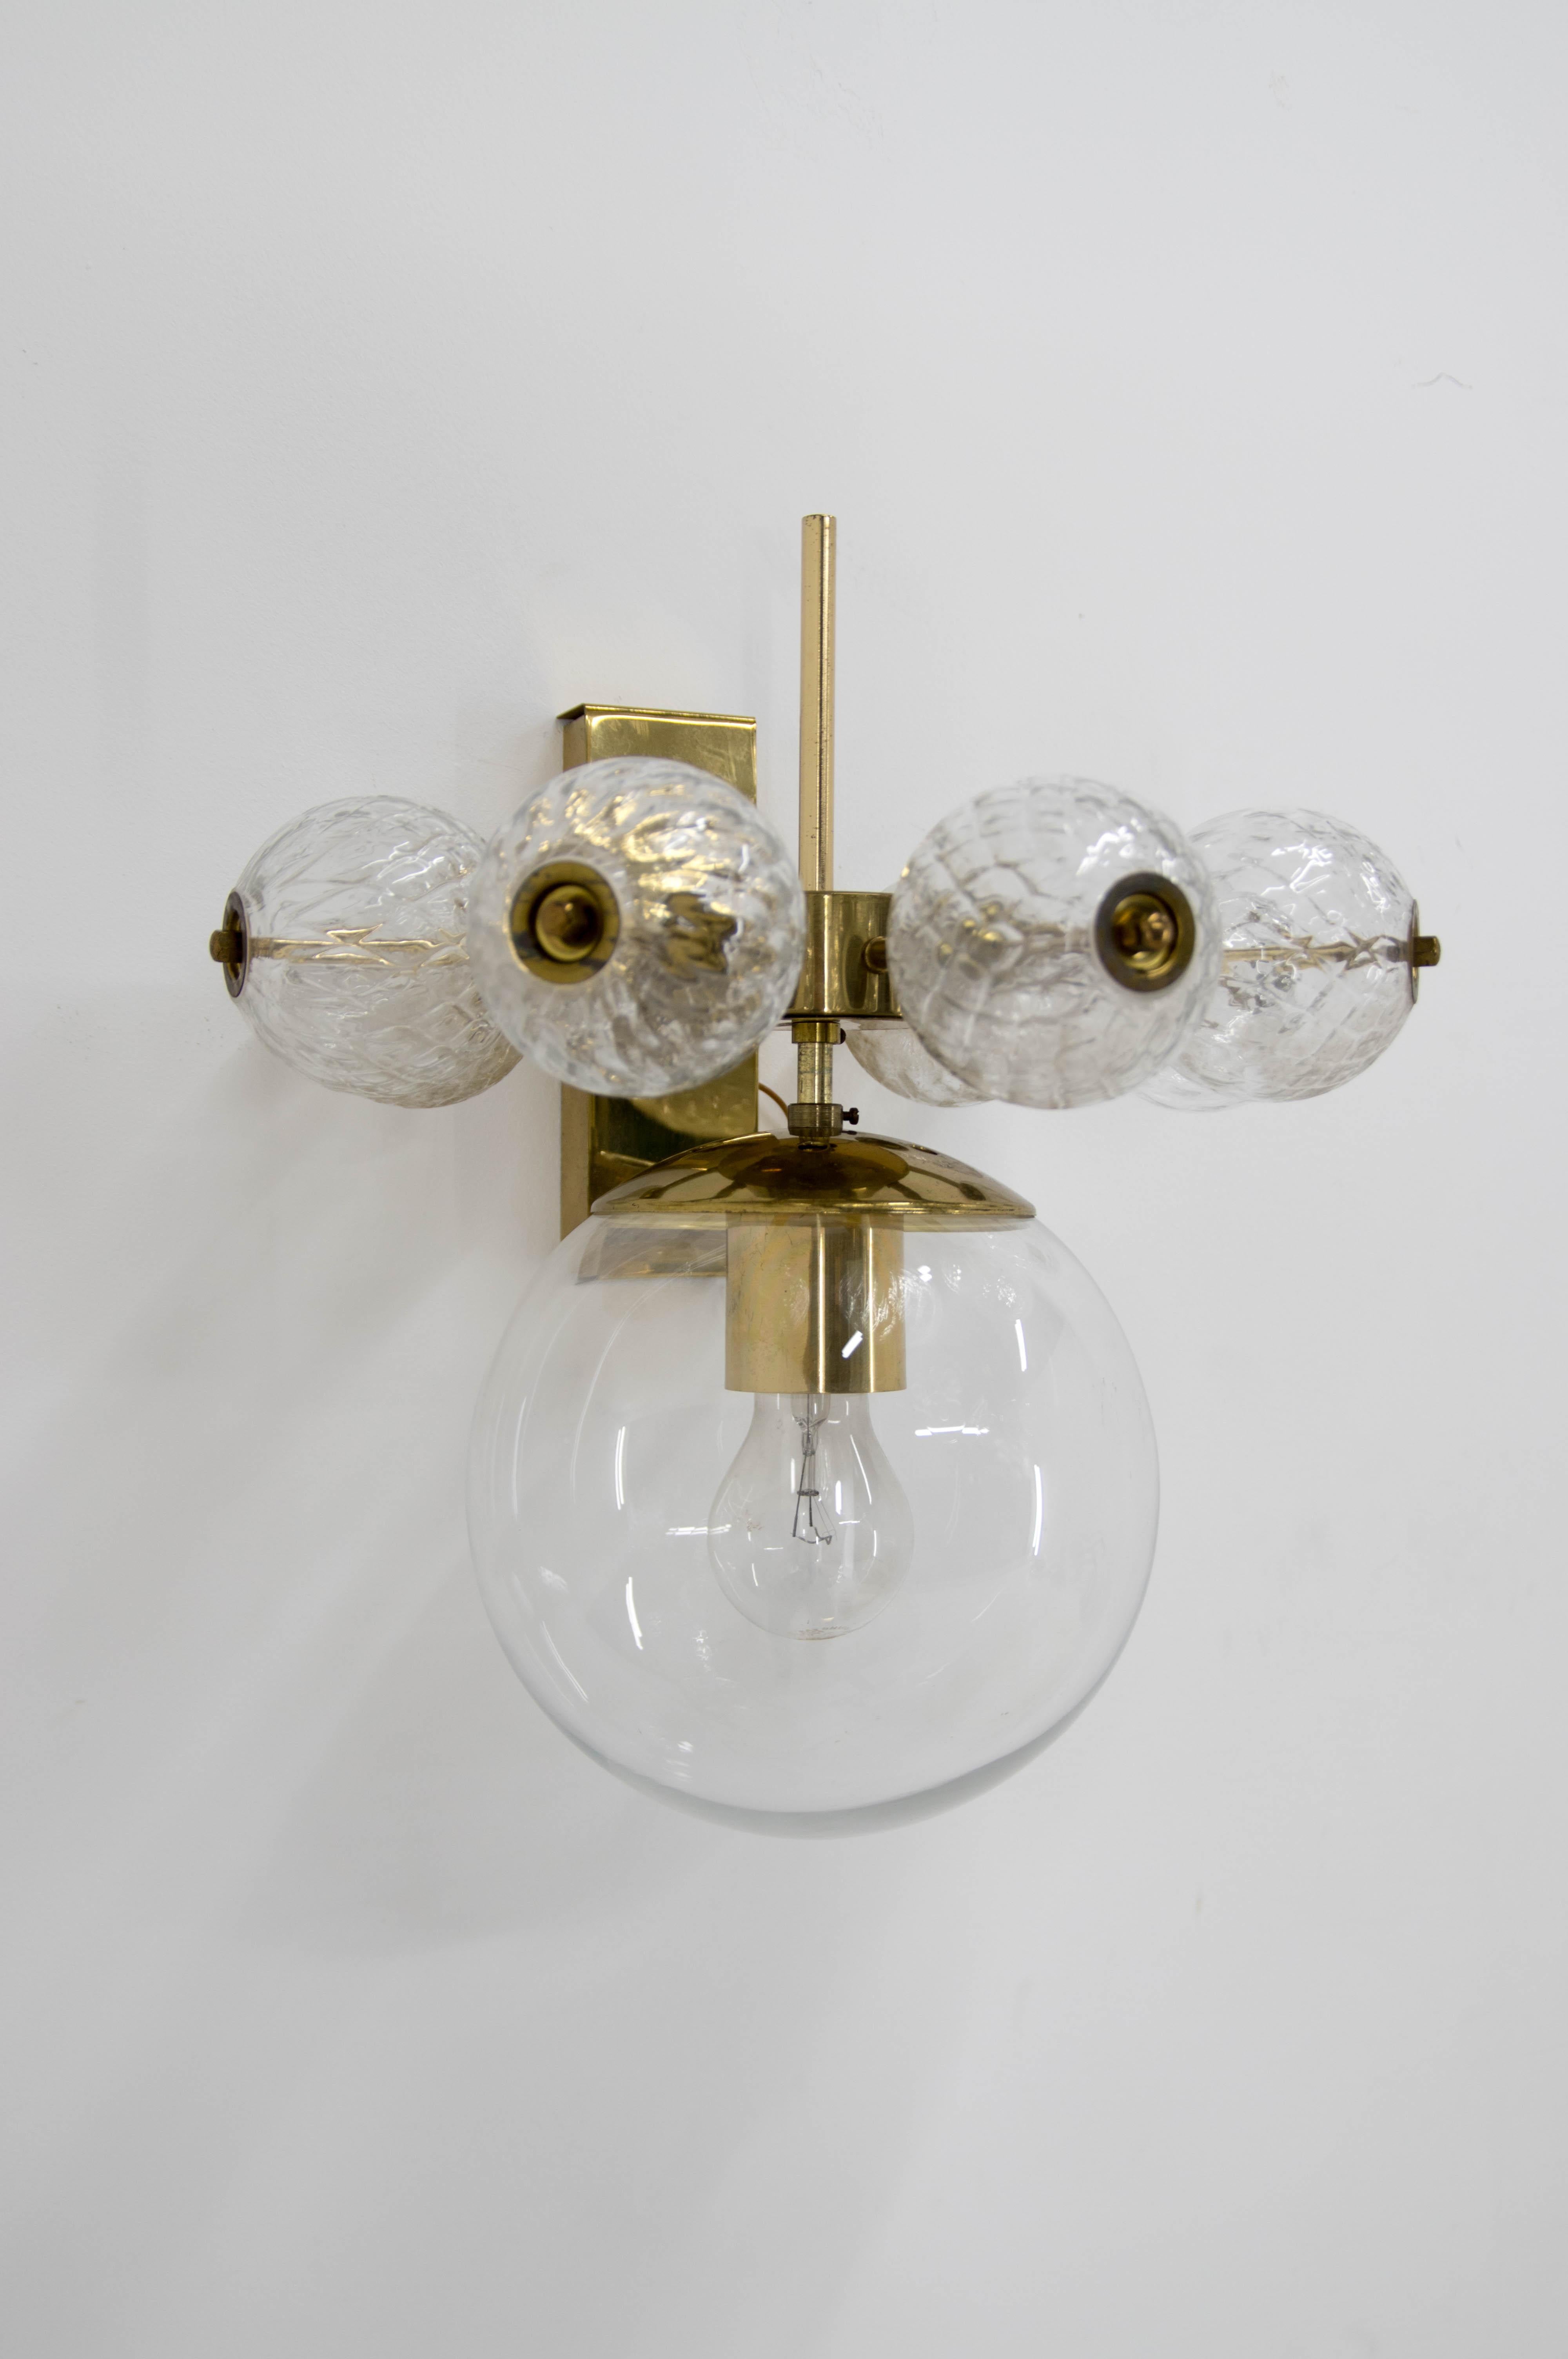 Designed by Bejvl in the 1980s, this beautiful wall lamp was part of a large concept of luminaires using different sizes of blown glass spheres attached in many variations to a brass structure
More items available
1x60W, E25-E27 bulb
US wiring